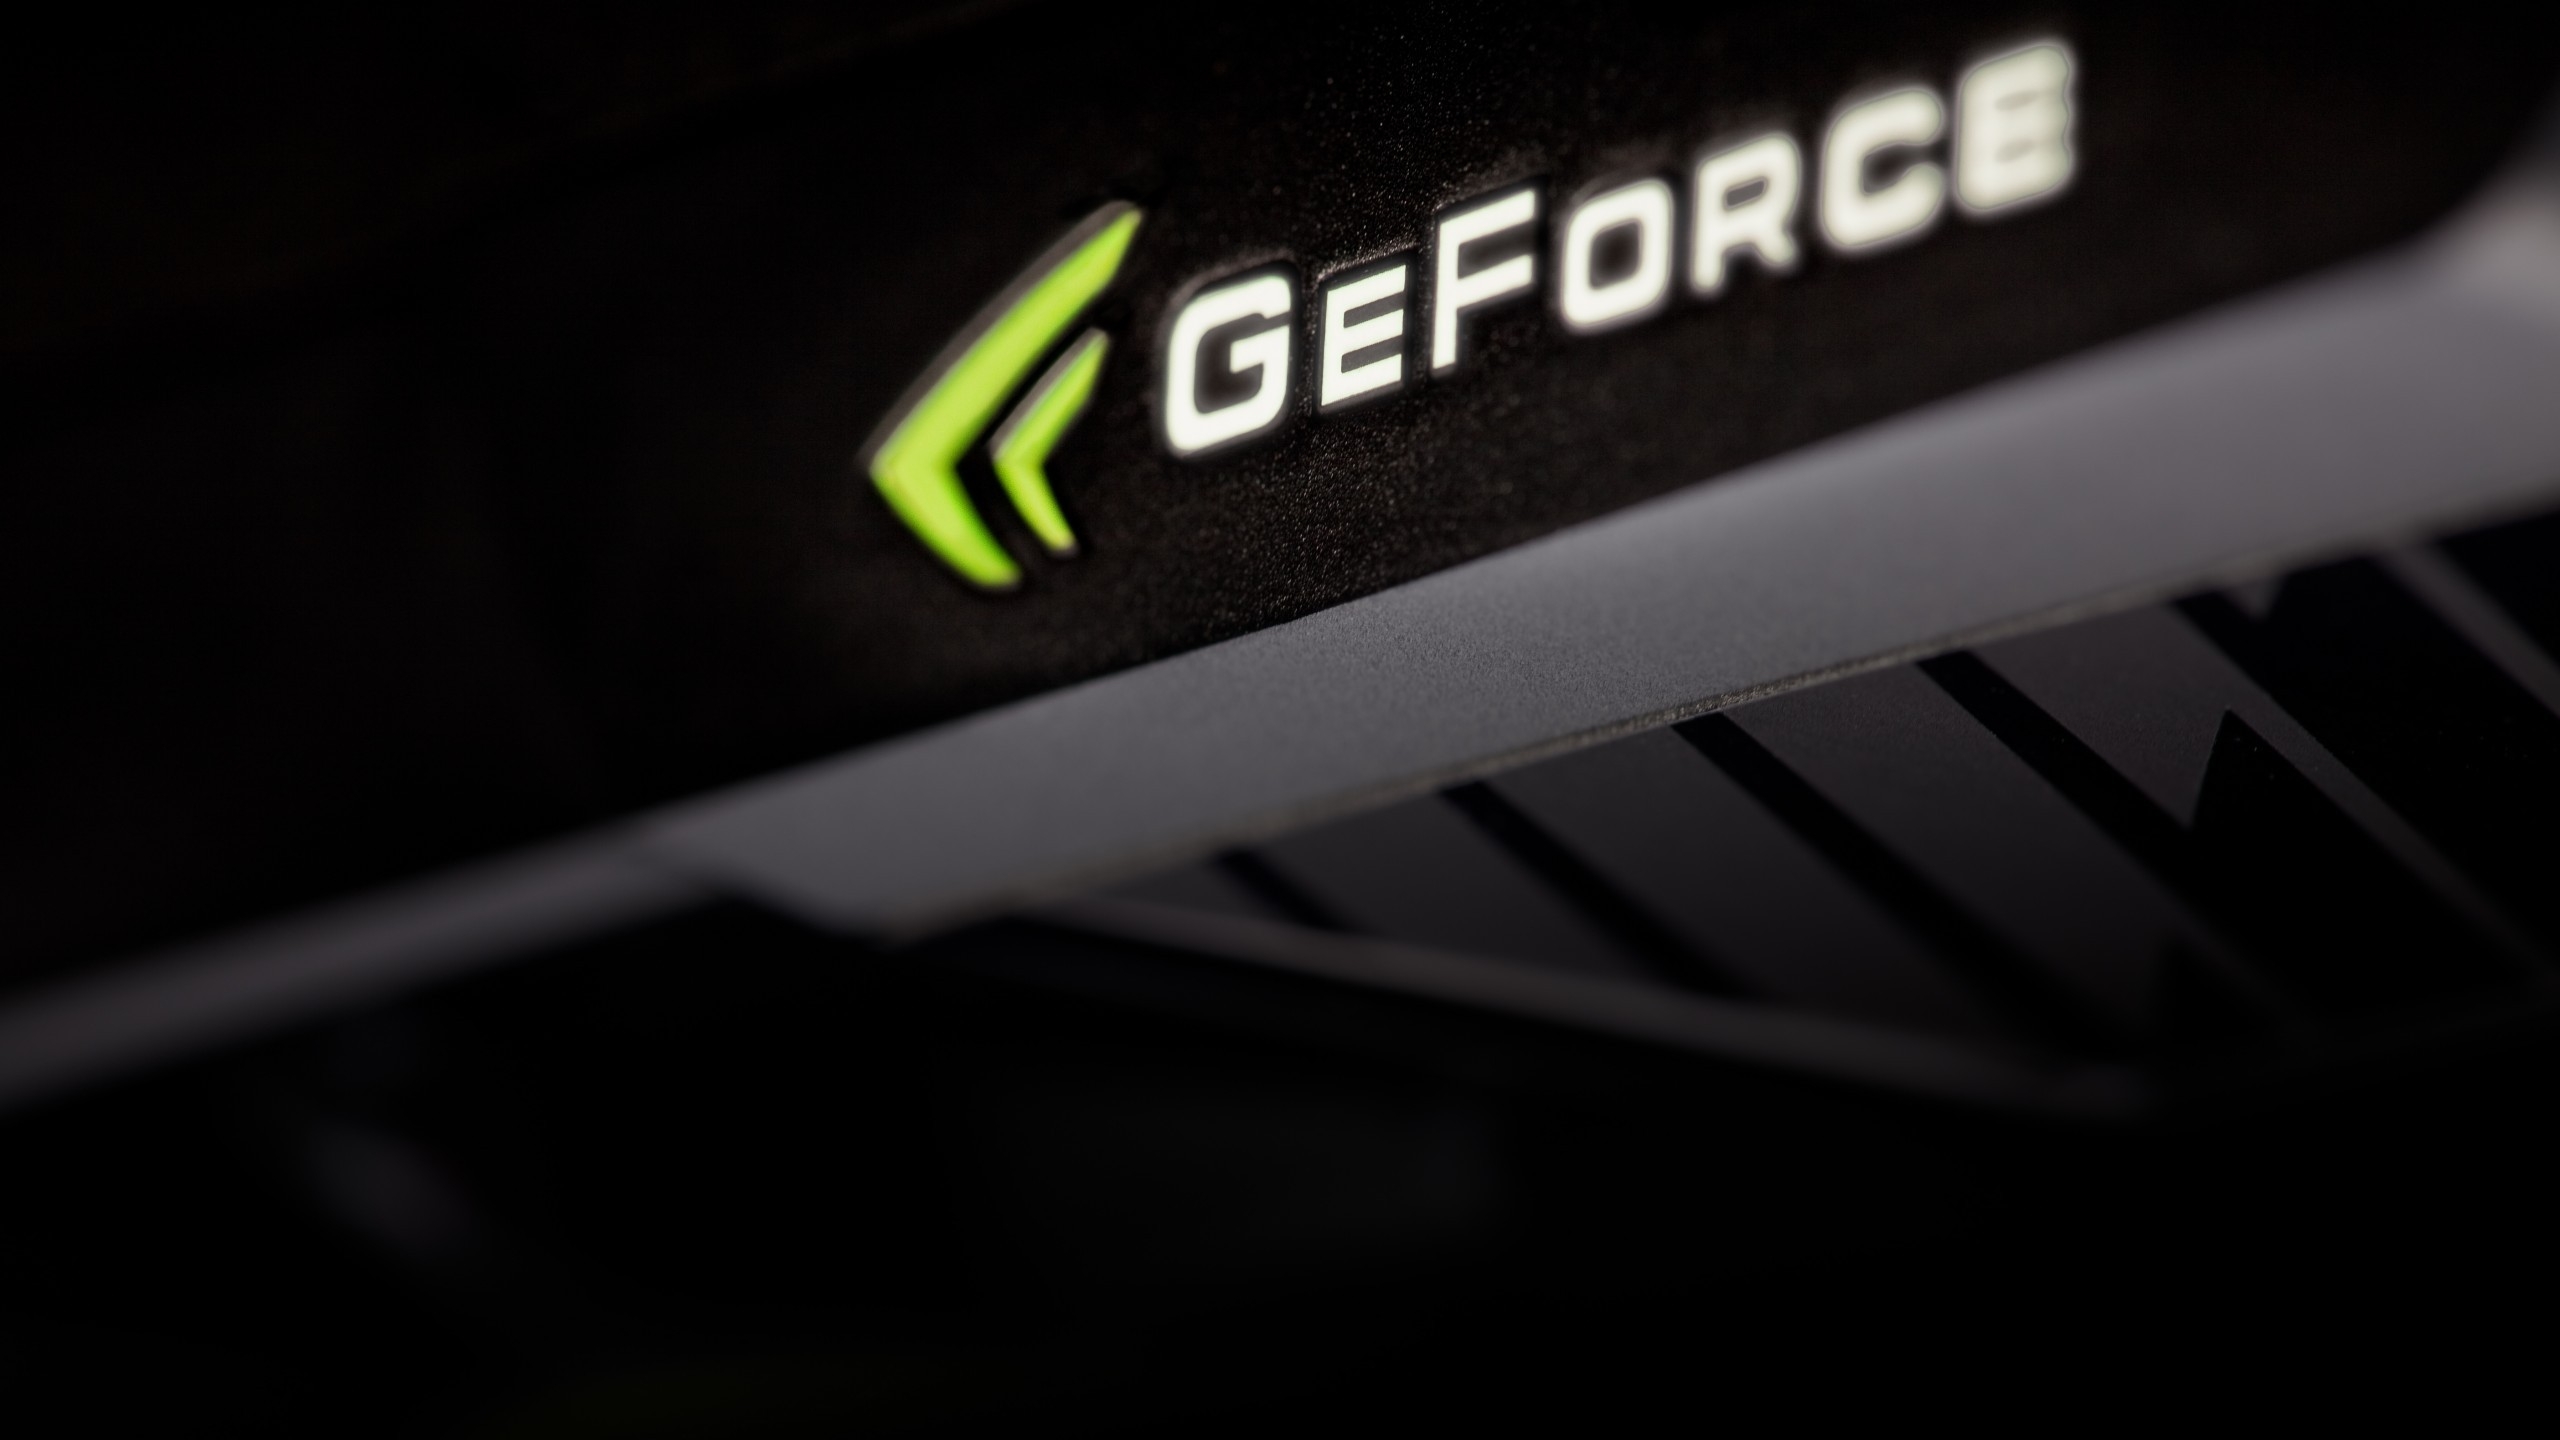 GeForce Graphics for 2560x1440 HDTV resolution